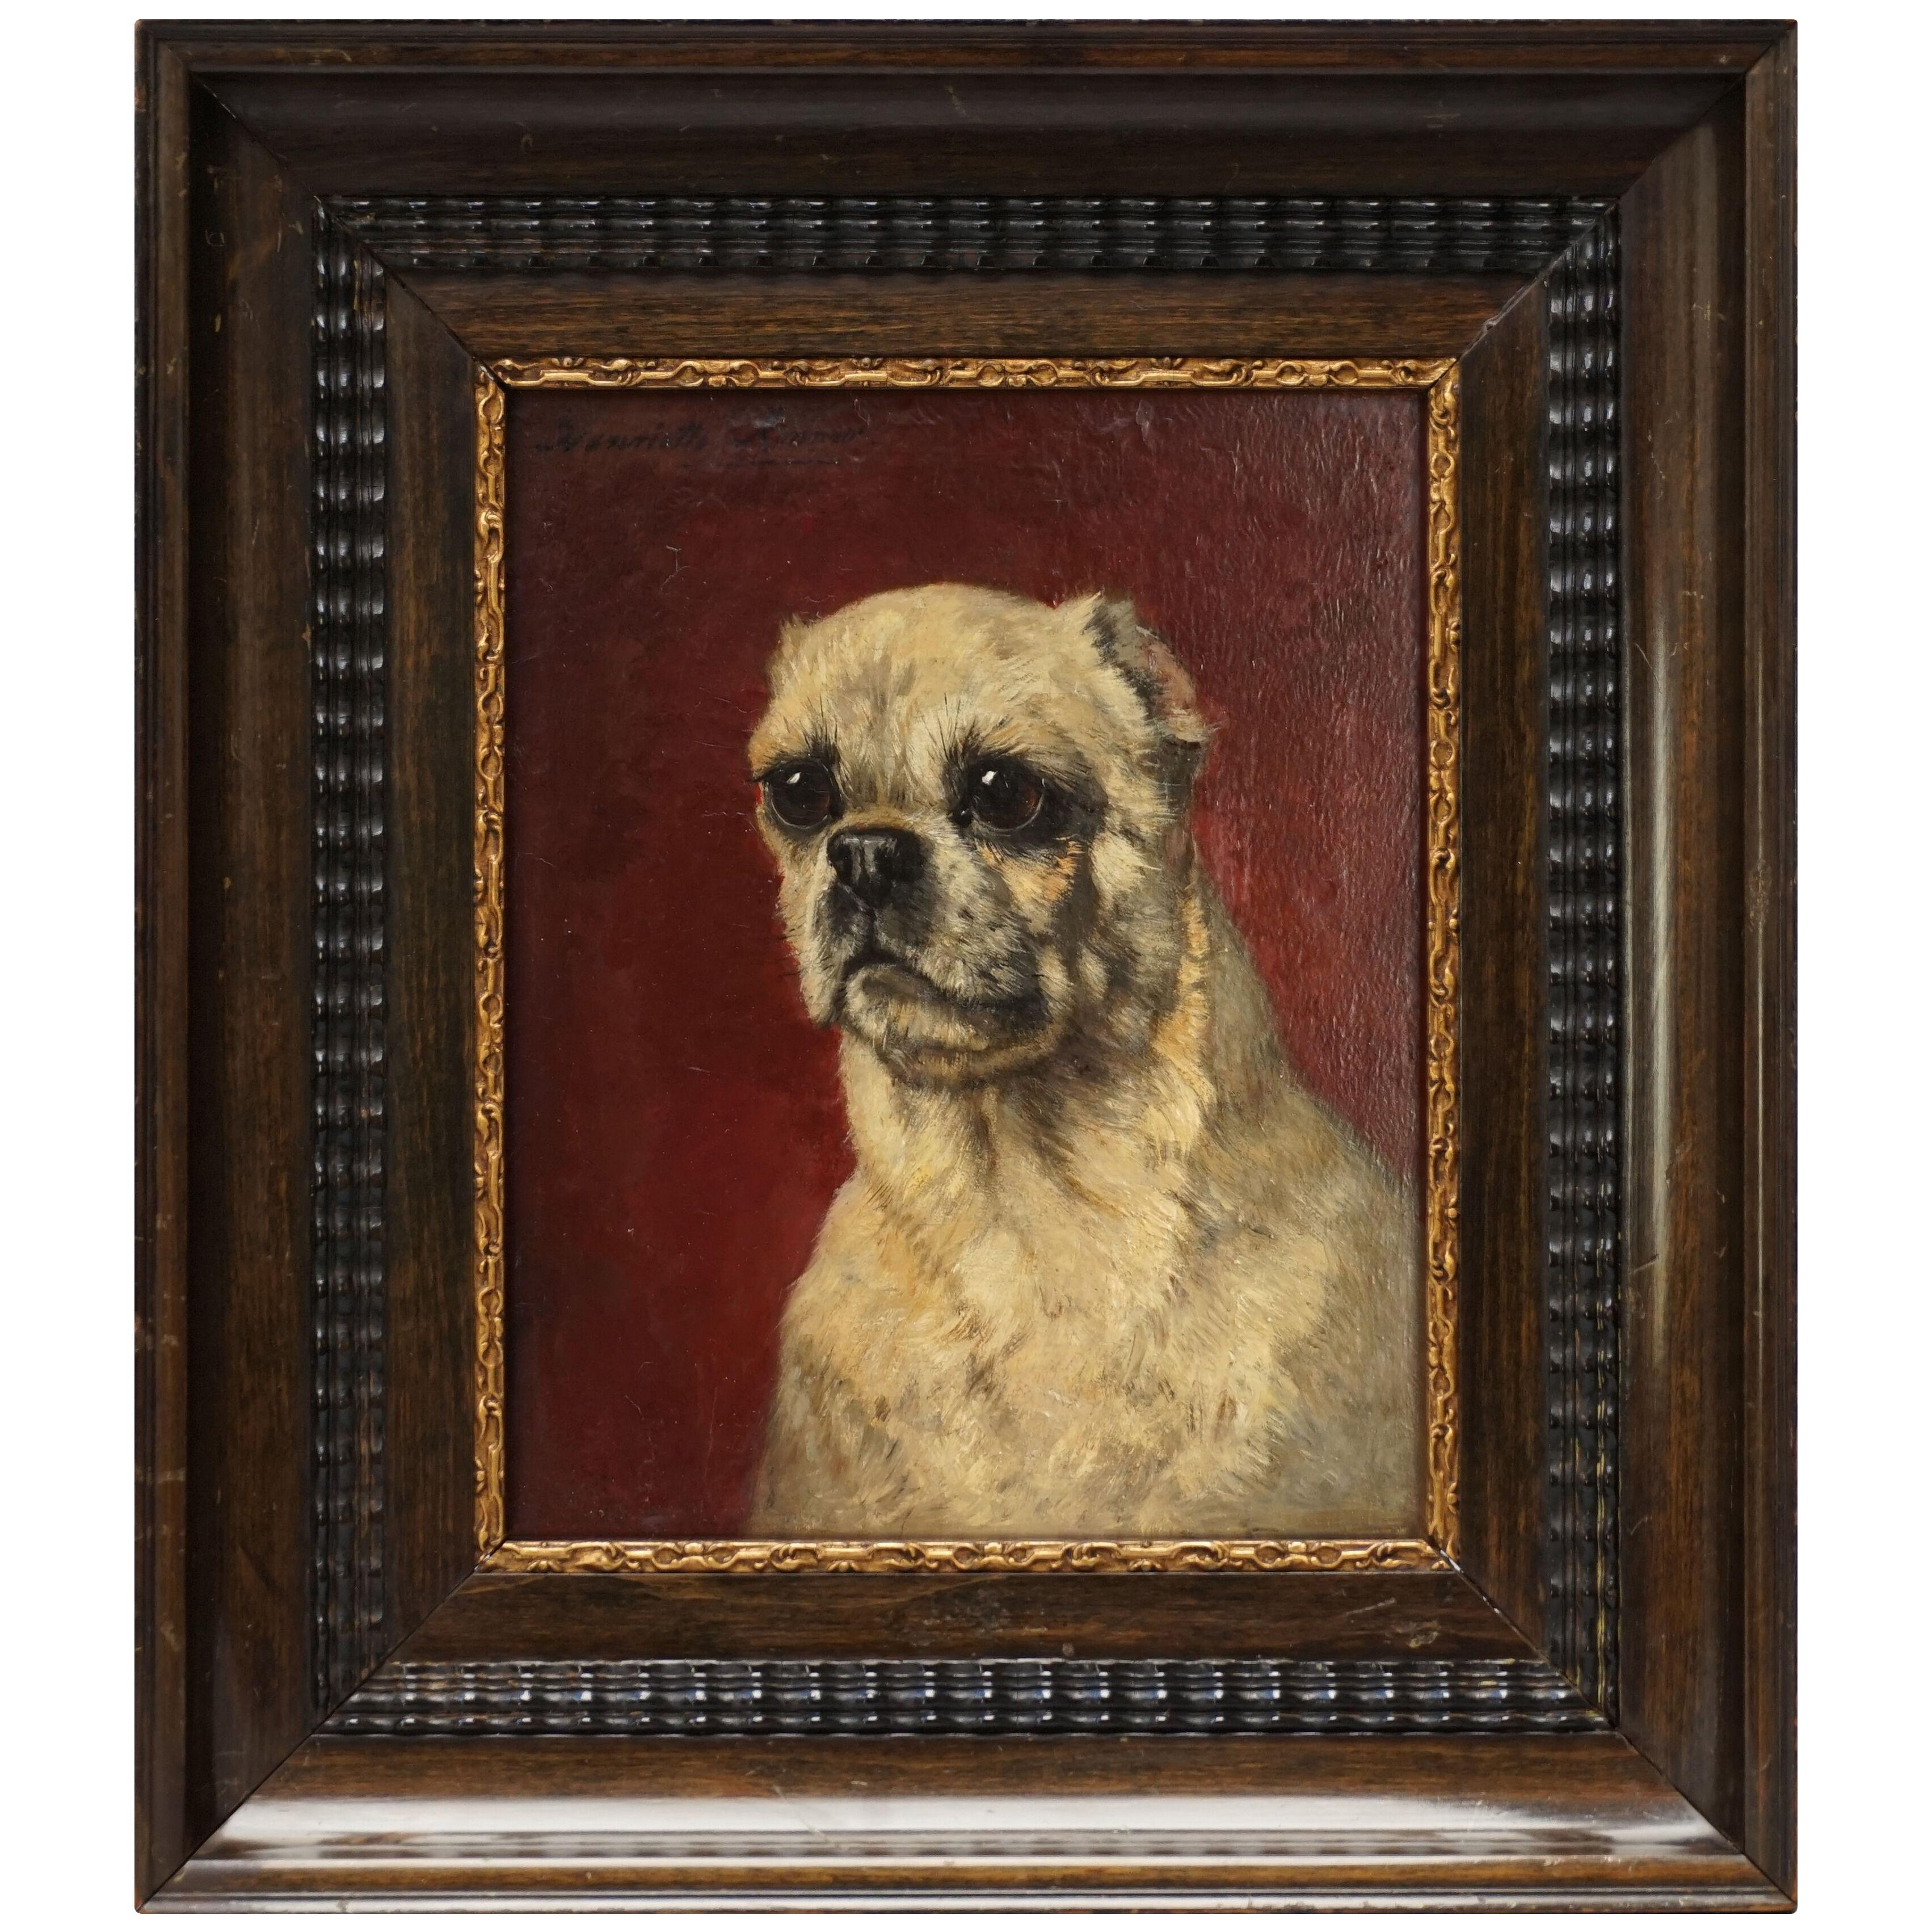 19th Century Oil Painting of a Pug Dog by Henriëtte Ronner Knip on Wooden Panel